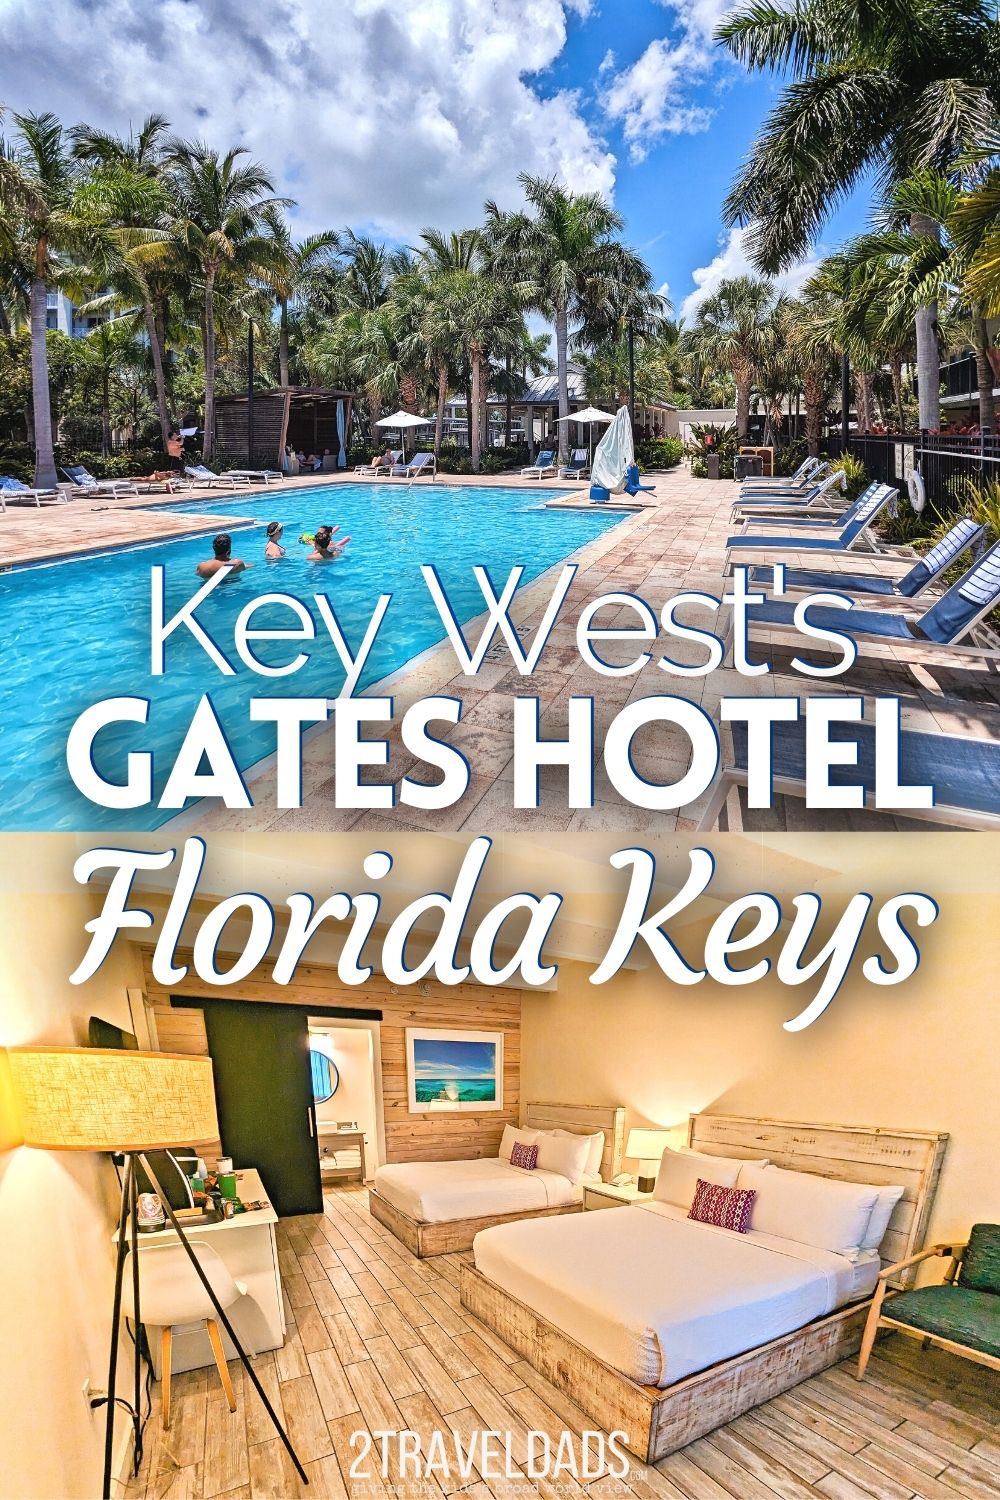 The Gates Hotel Key West is a great option for a budget visit to the Florida Keys. From the large pool to a free shuttle to downtown Key West see why we like the Gates Hotel for a family vacation.